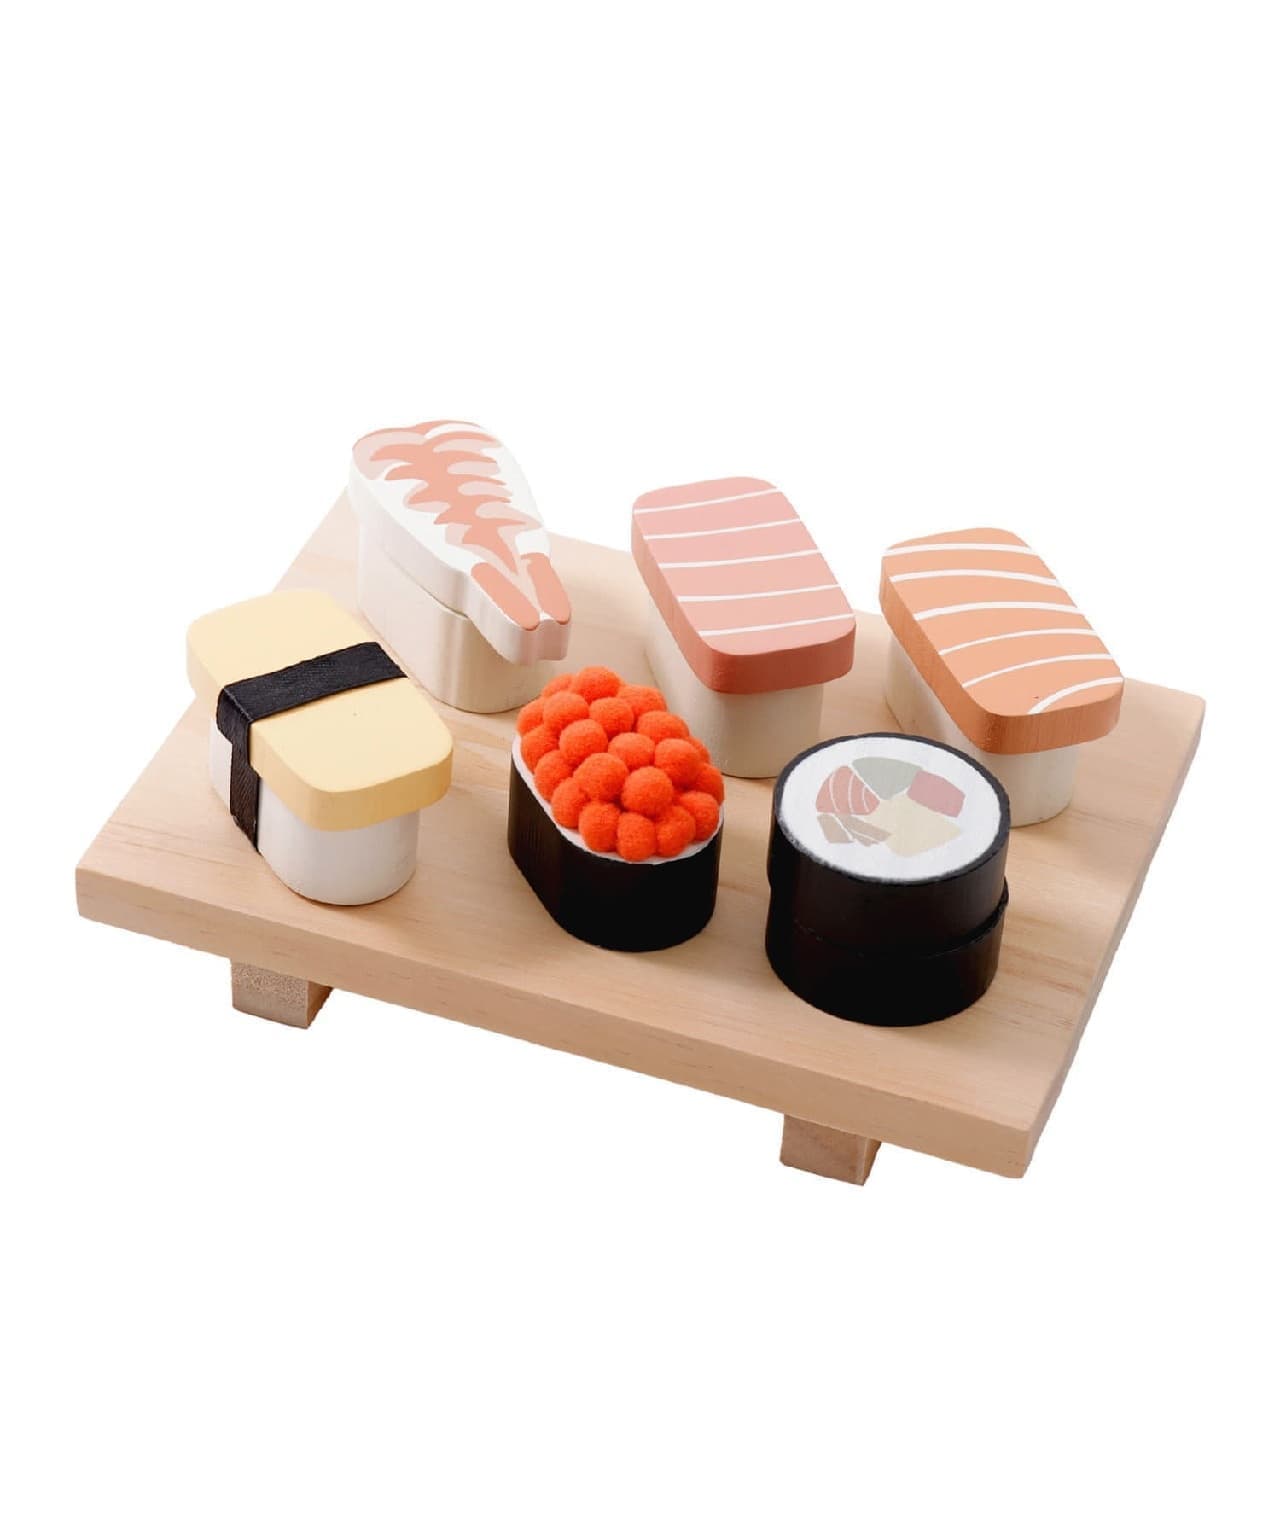 Sushi (Let's play house!)